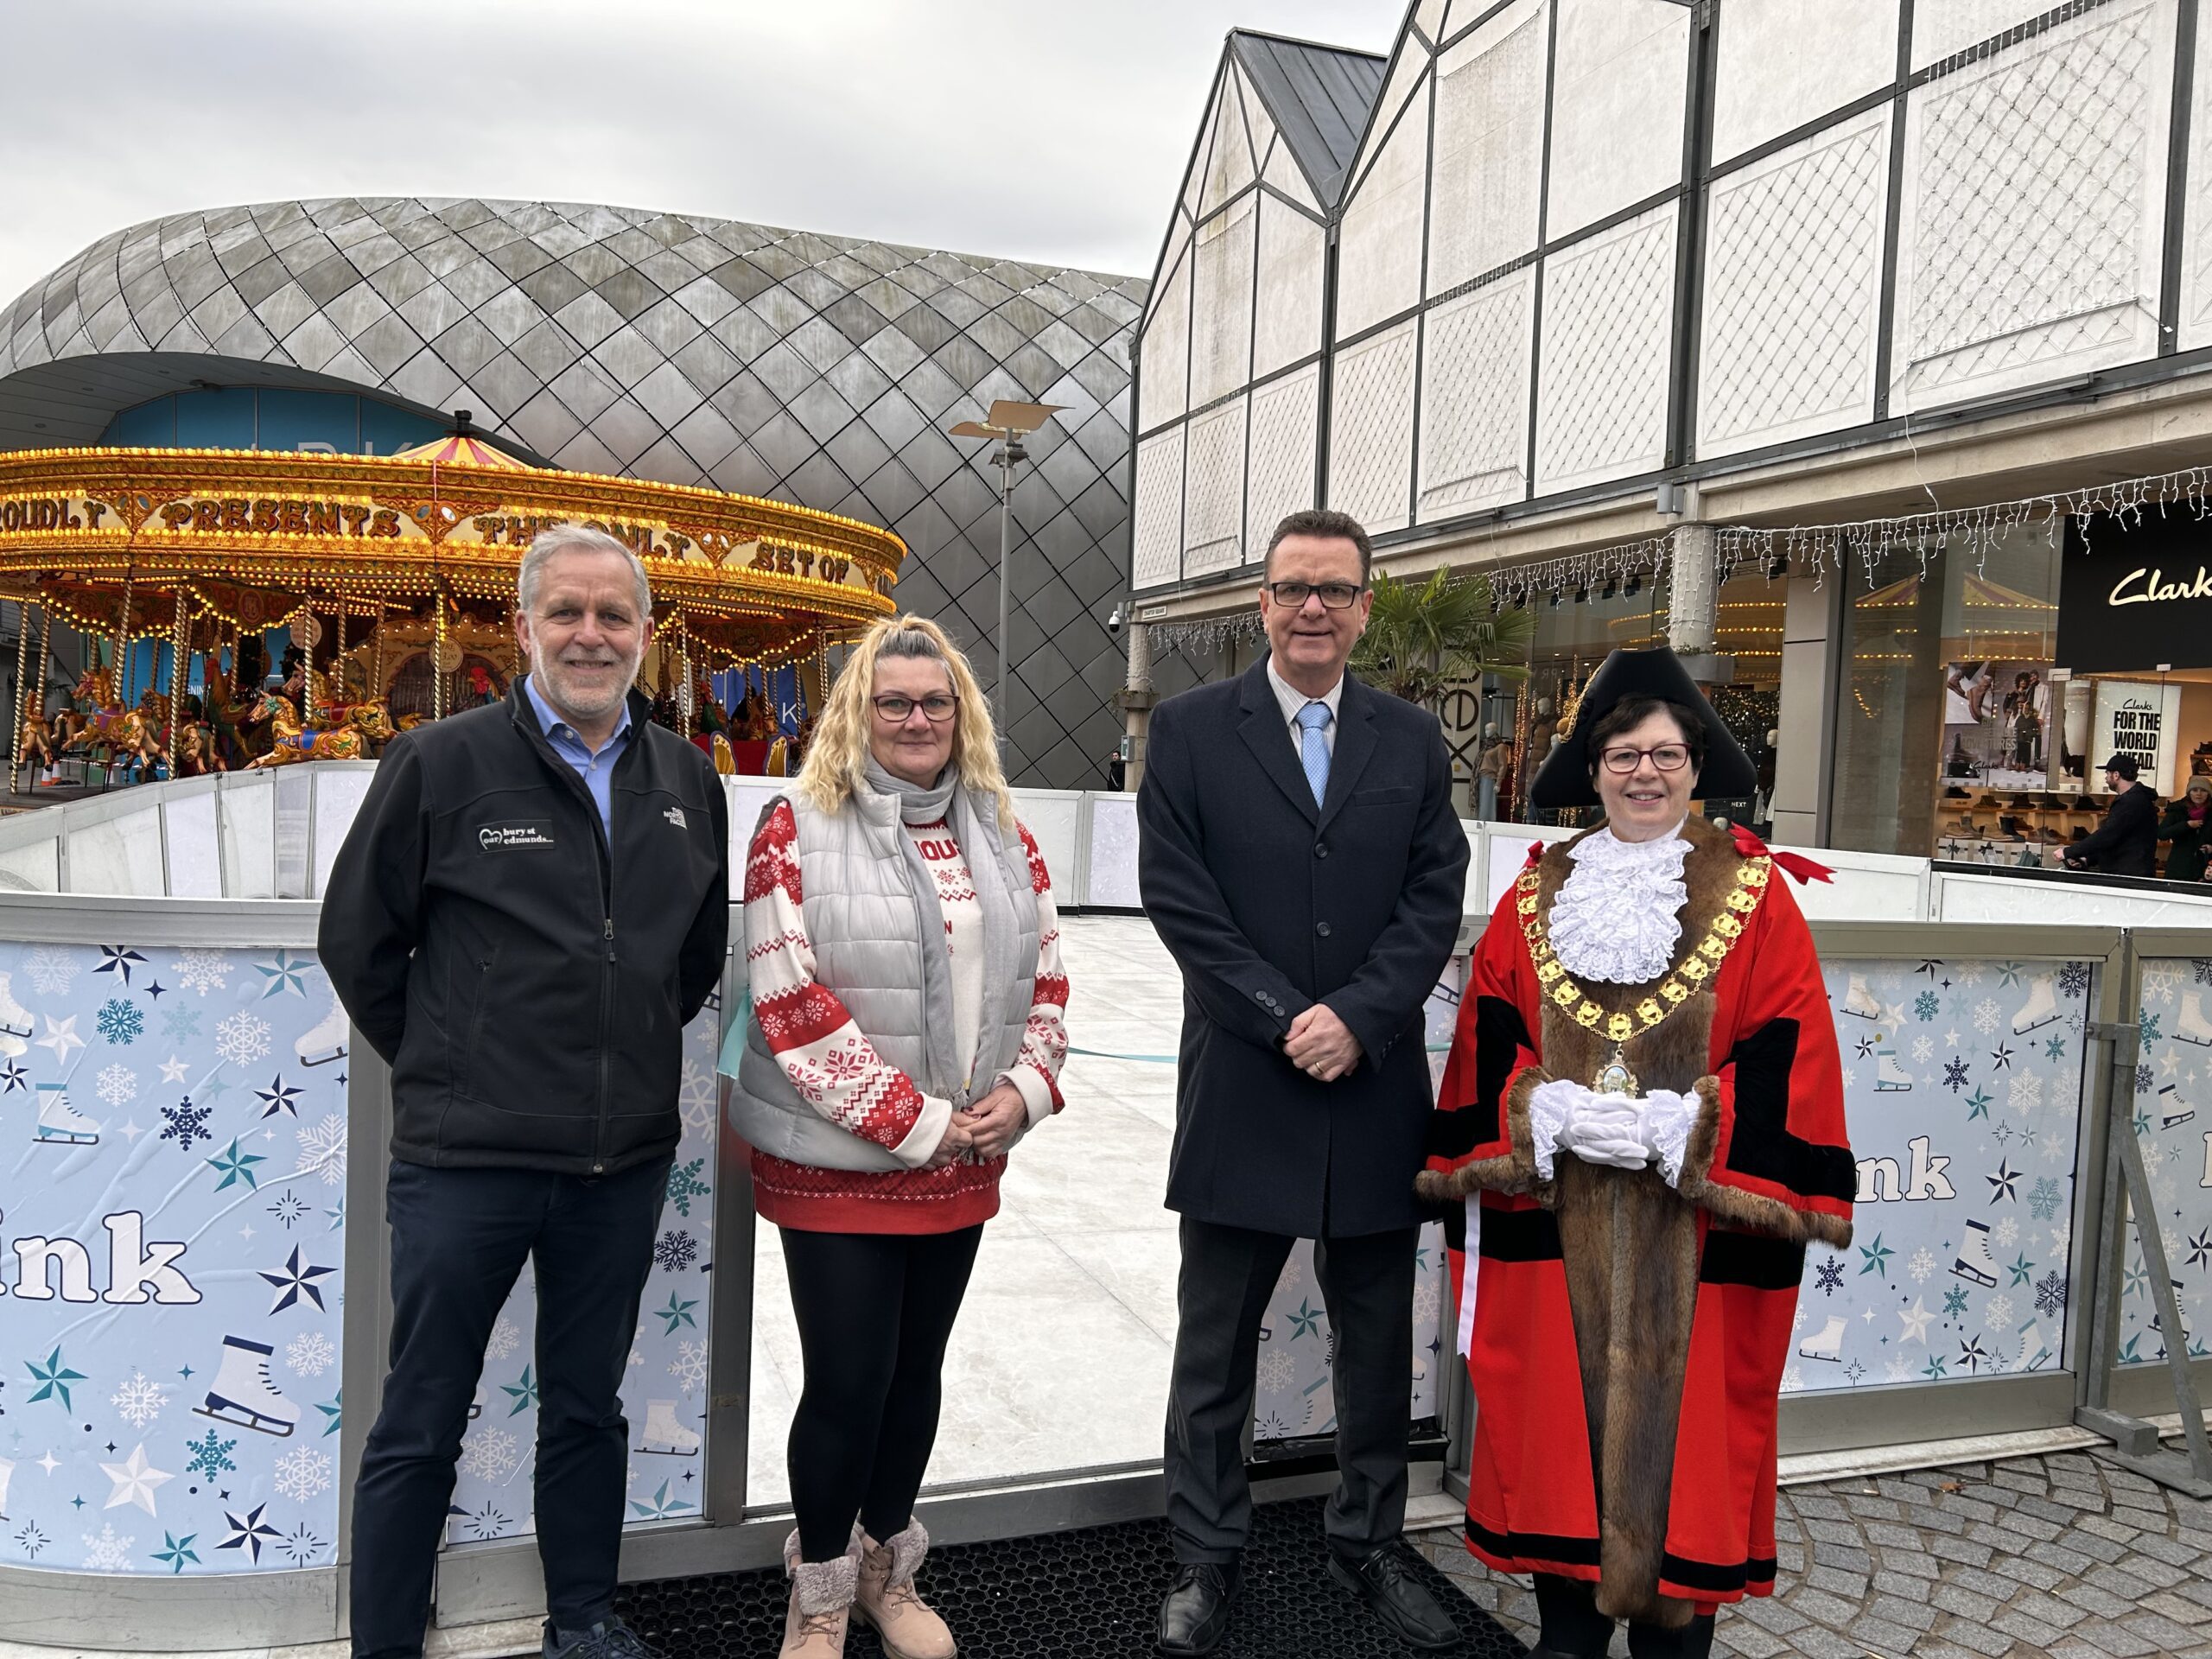 Ice rink attraction raised £2,500 for local charity